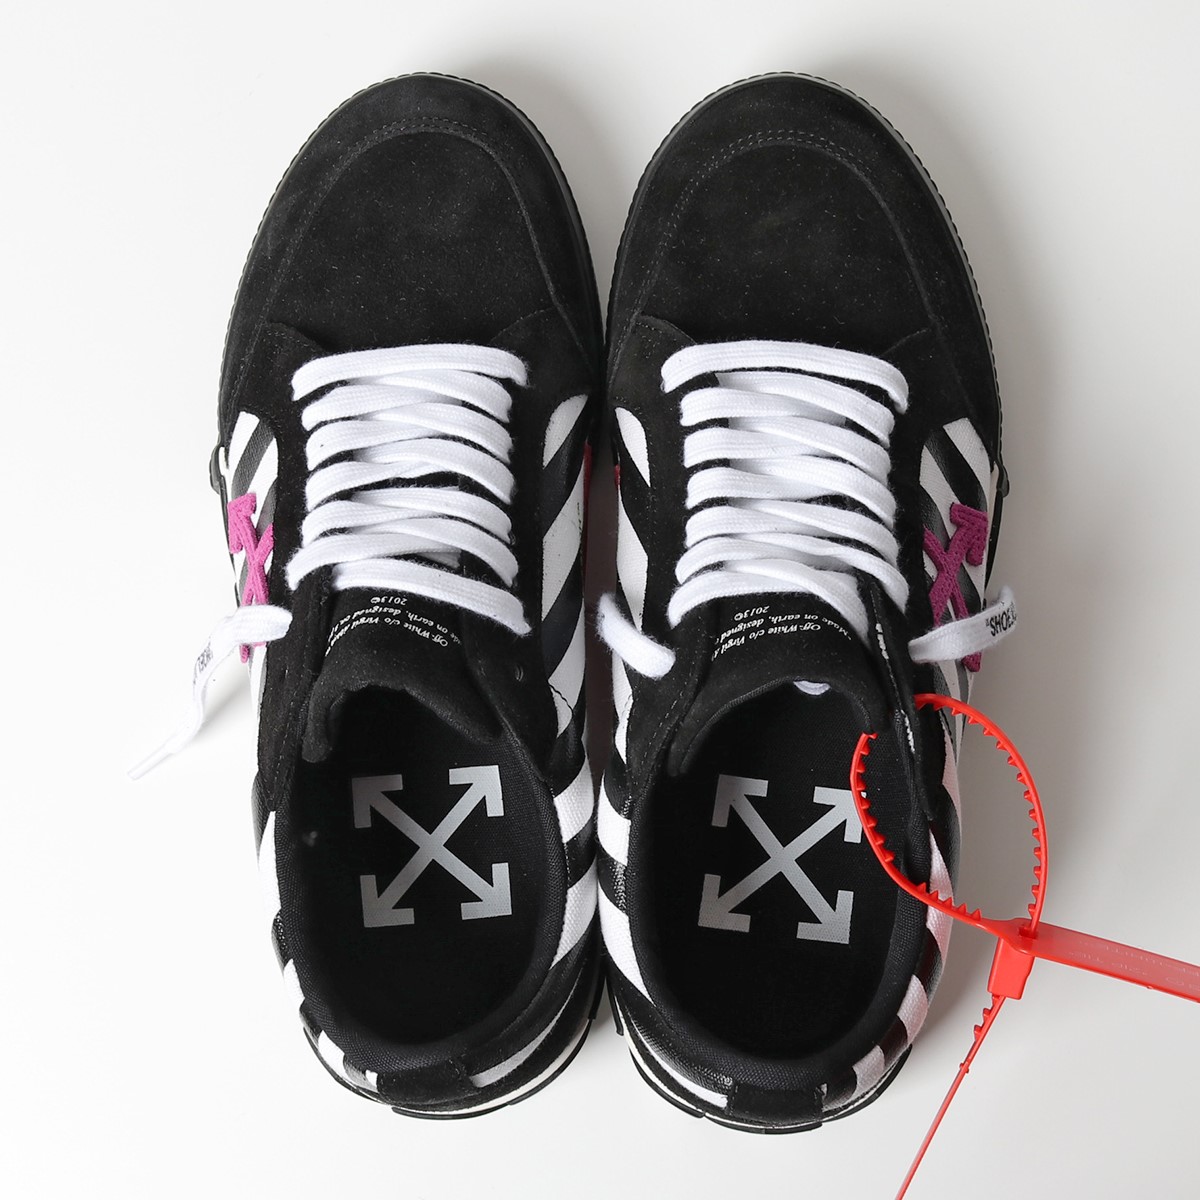 off white brand tennis shoes